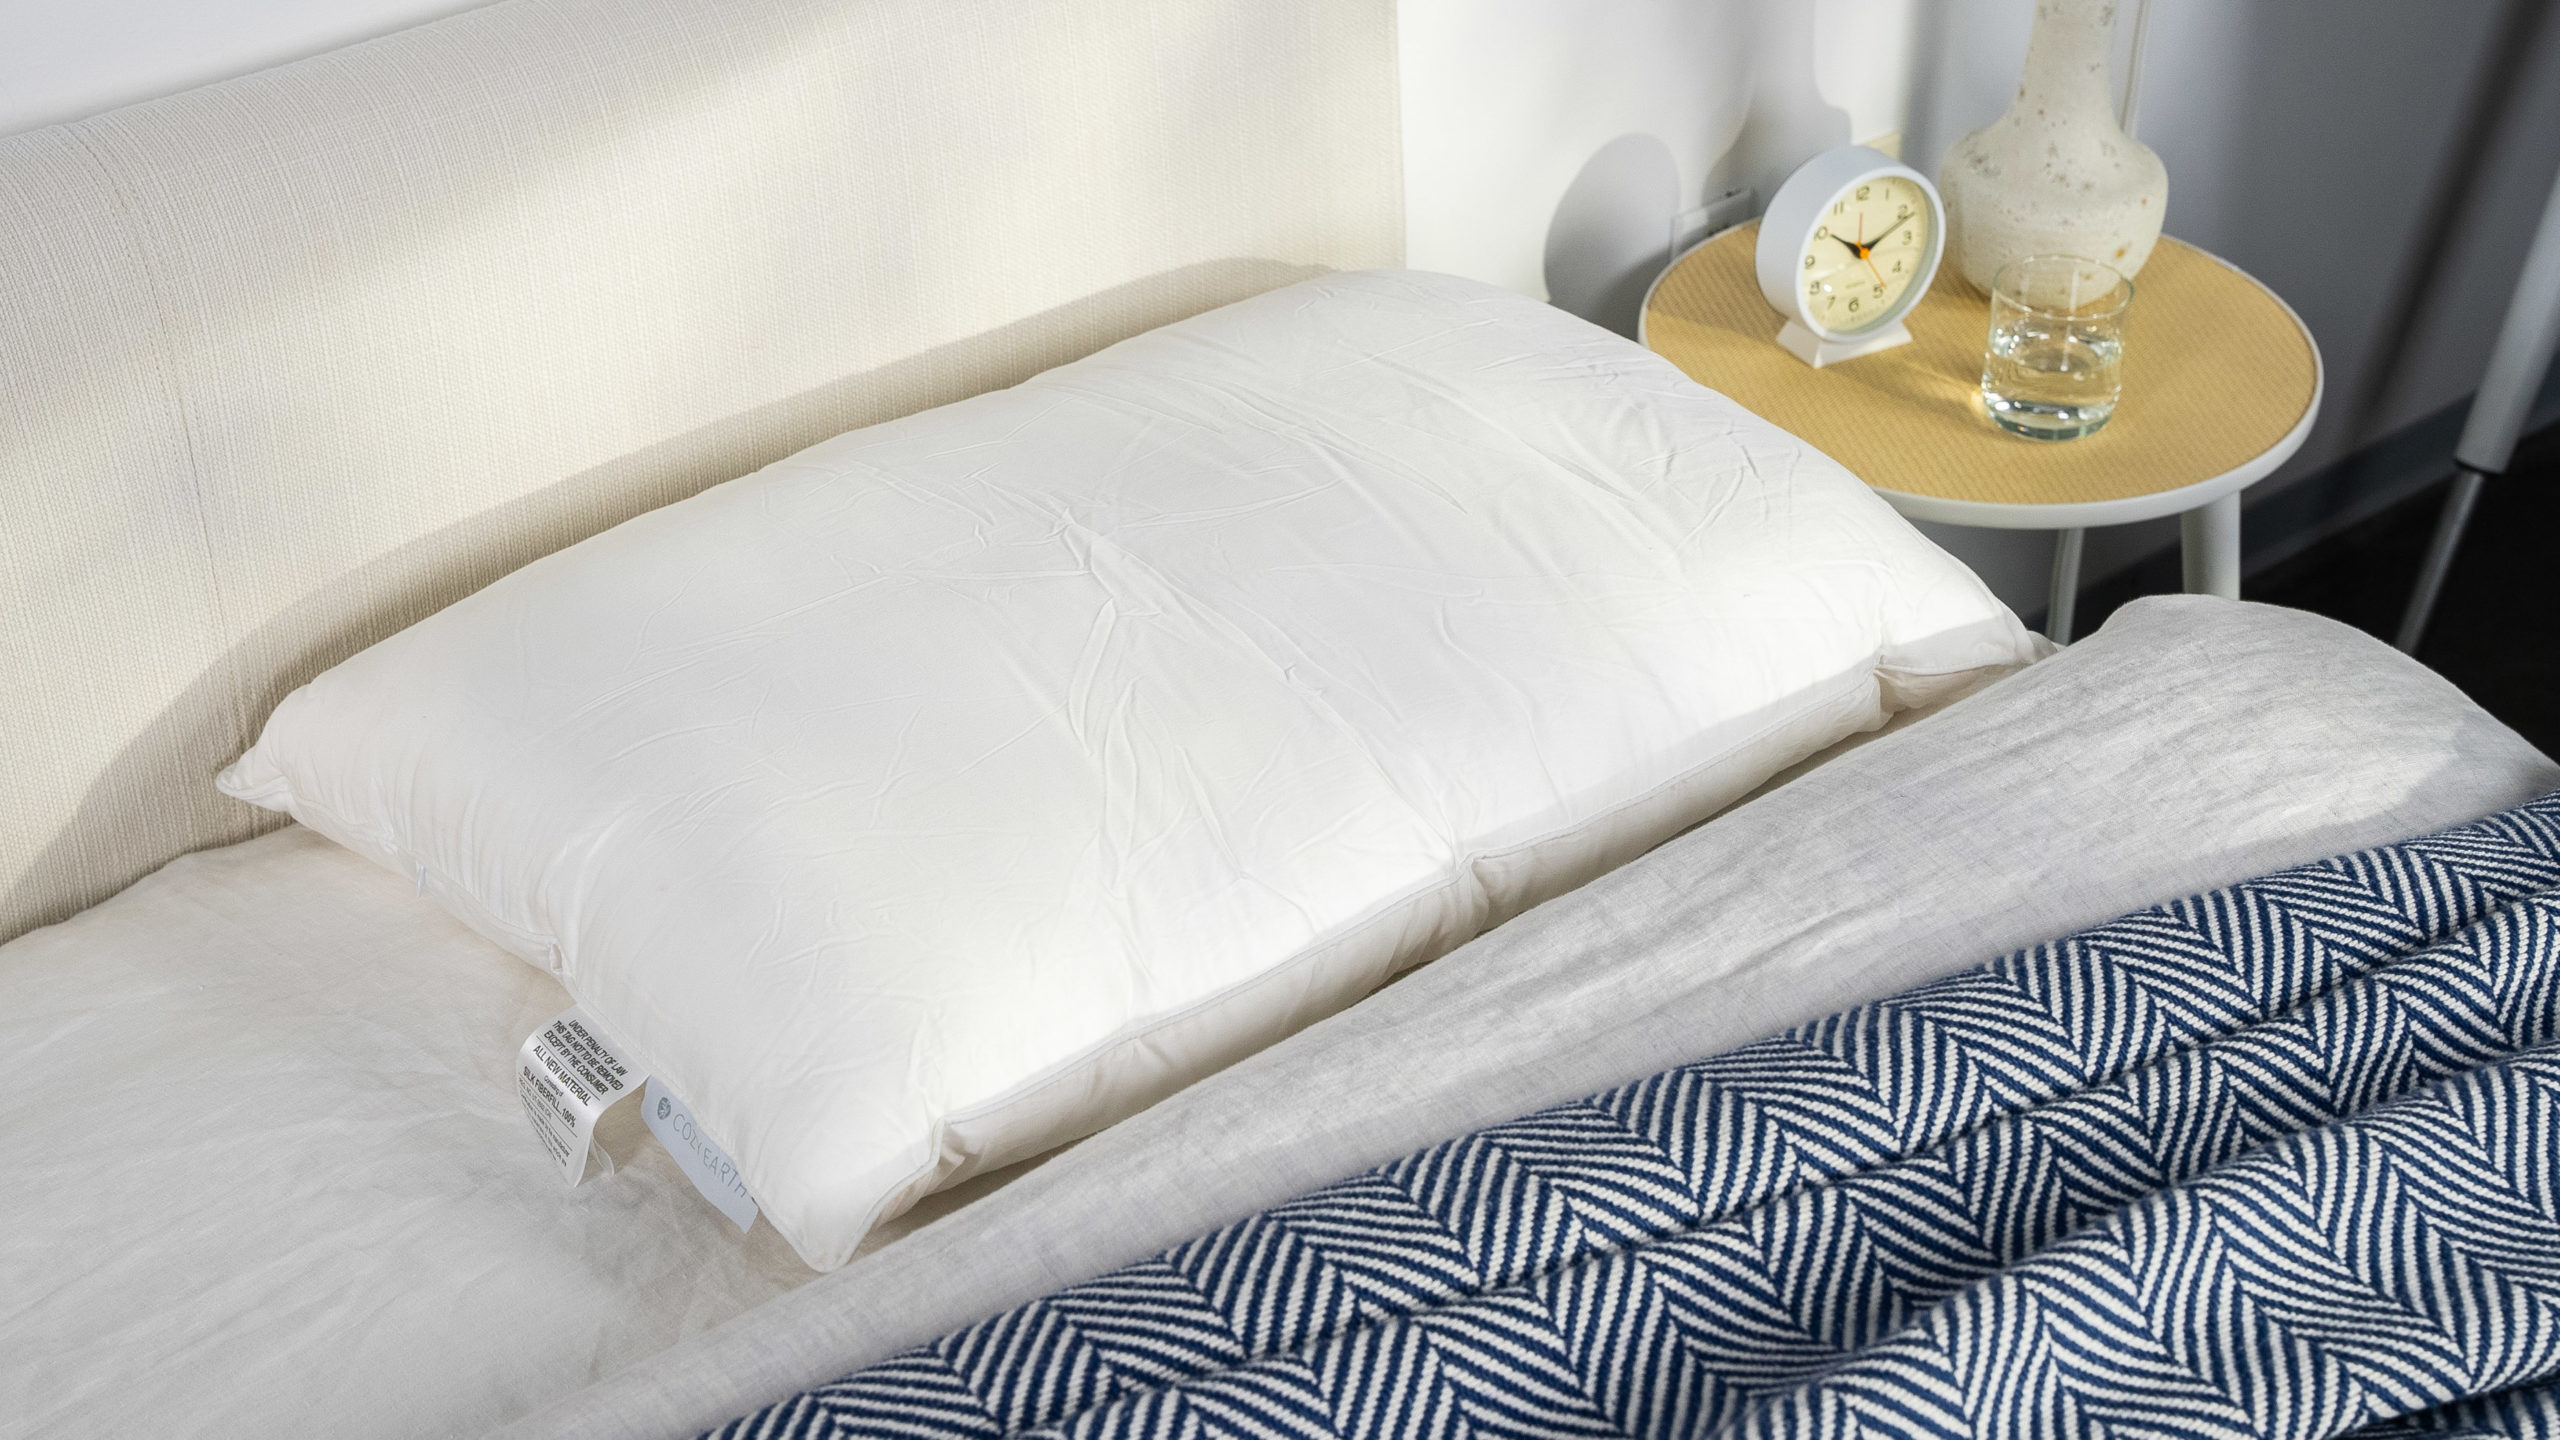 The 10 Best Hotel-style Pillows for Your Bedroom [2023]